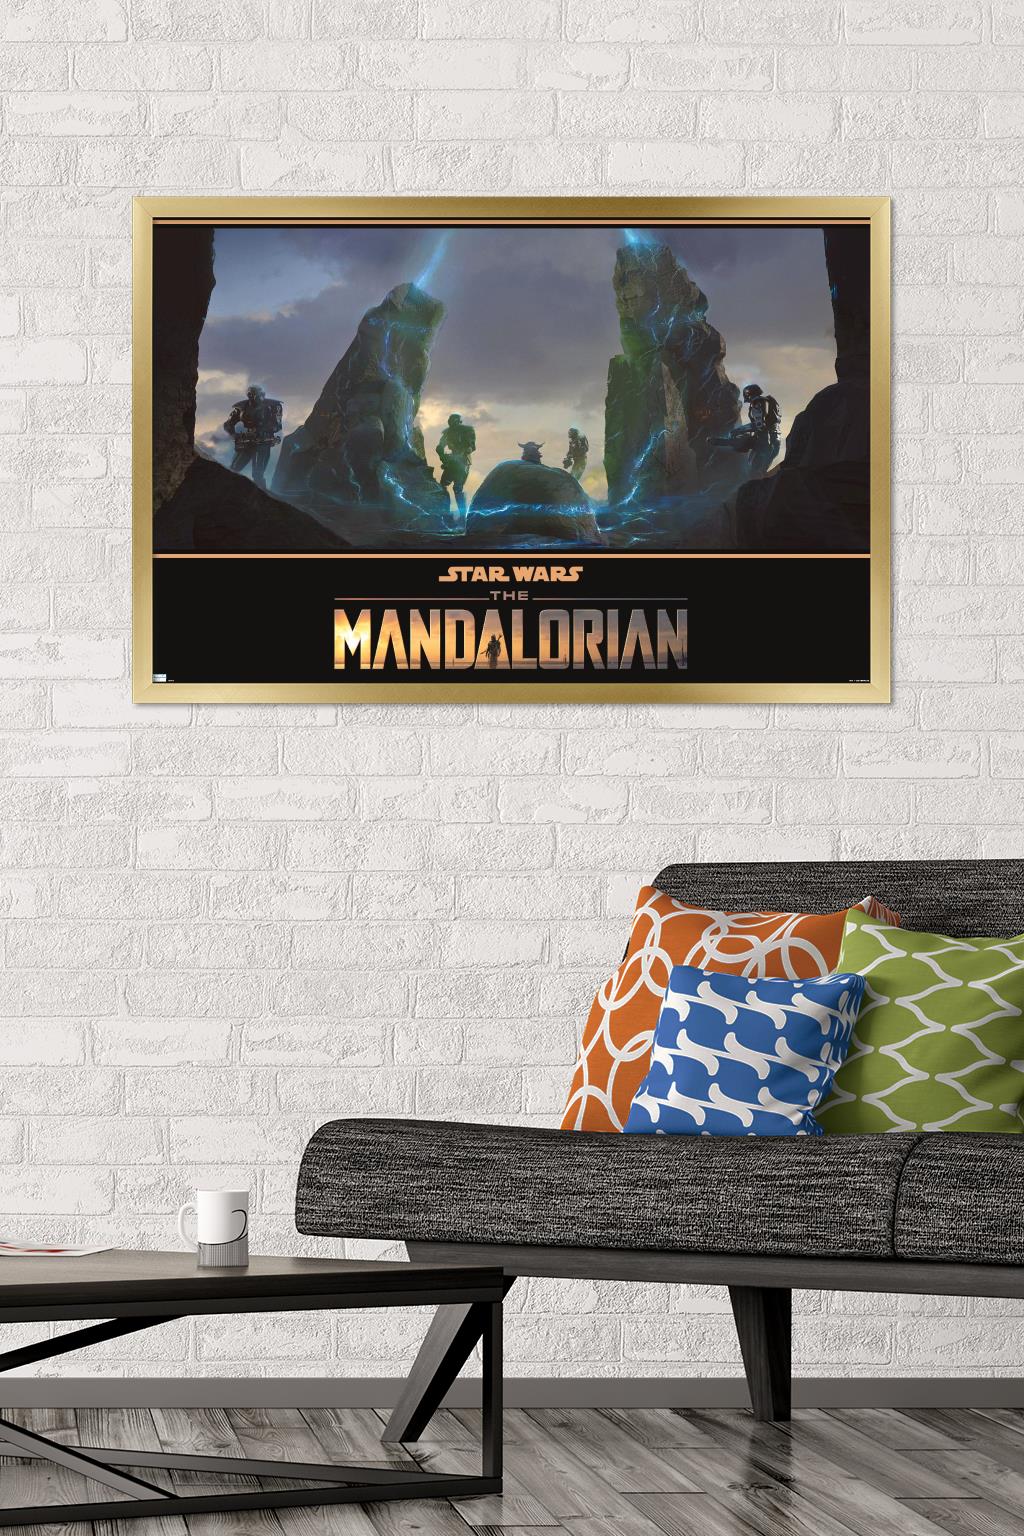 Star Wars: The Mandalorian Season 2 - Seeing Stone Wall Poster, 22.375" x 34", Framed - image 2 of 5